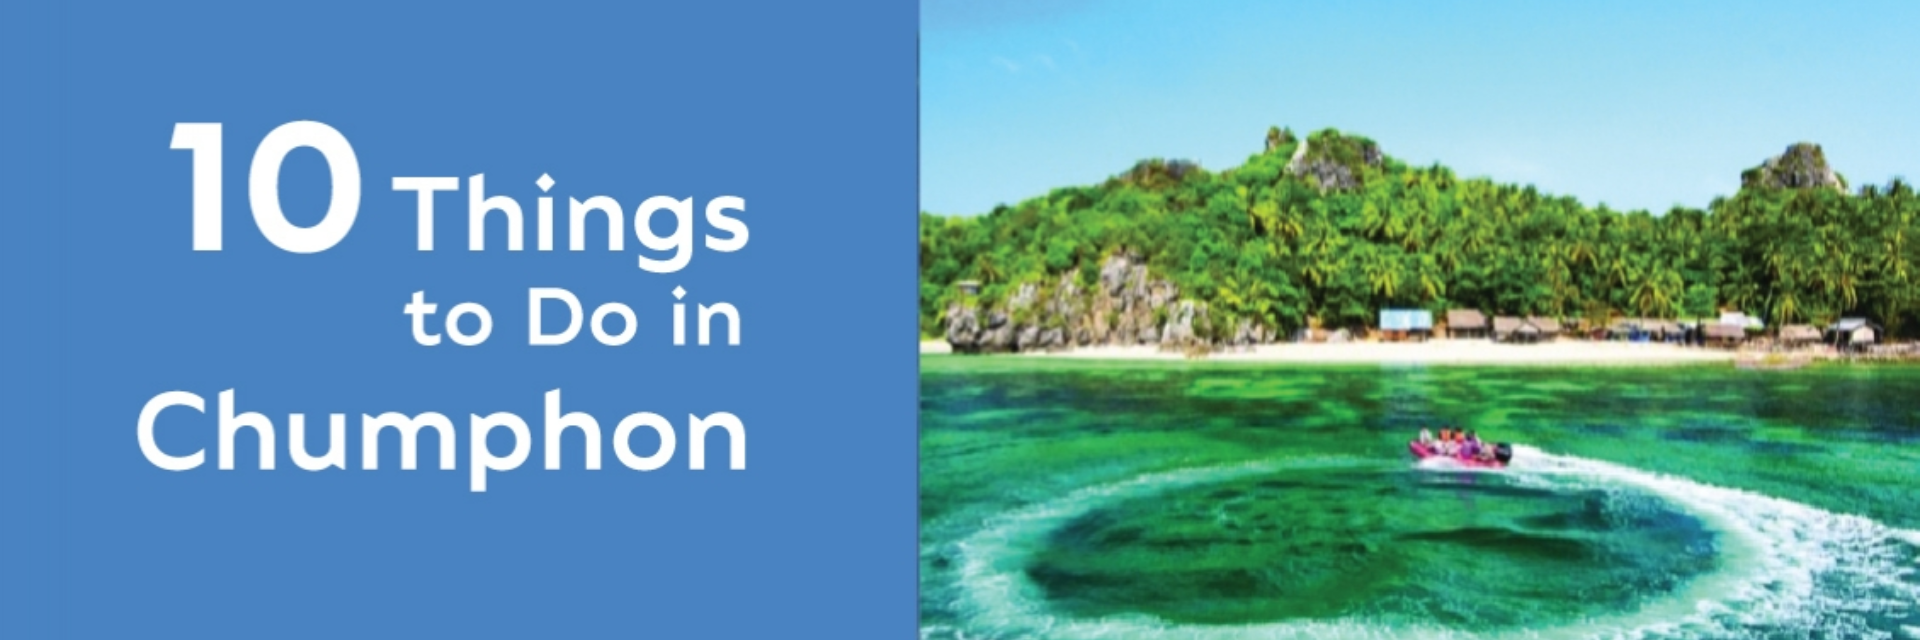 10 THINGS TO DO IN CHUMPHON